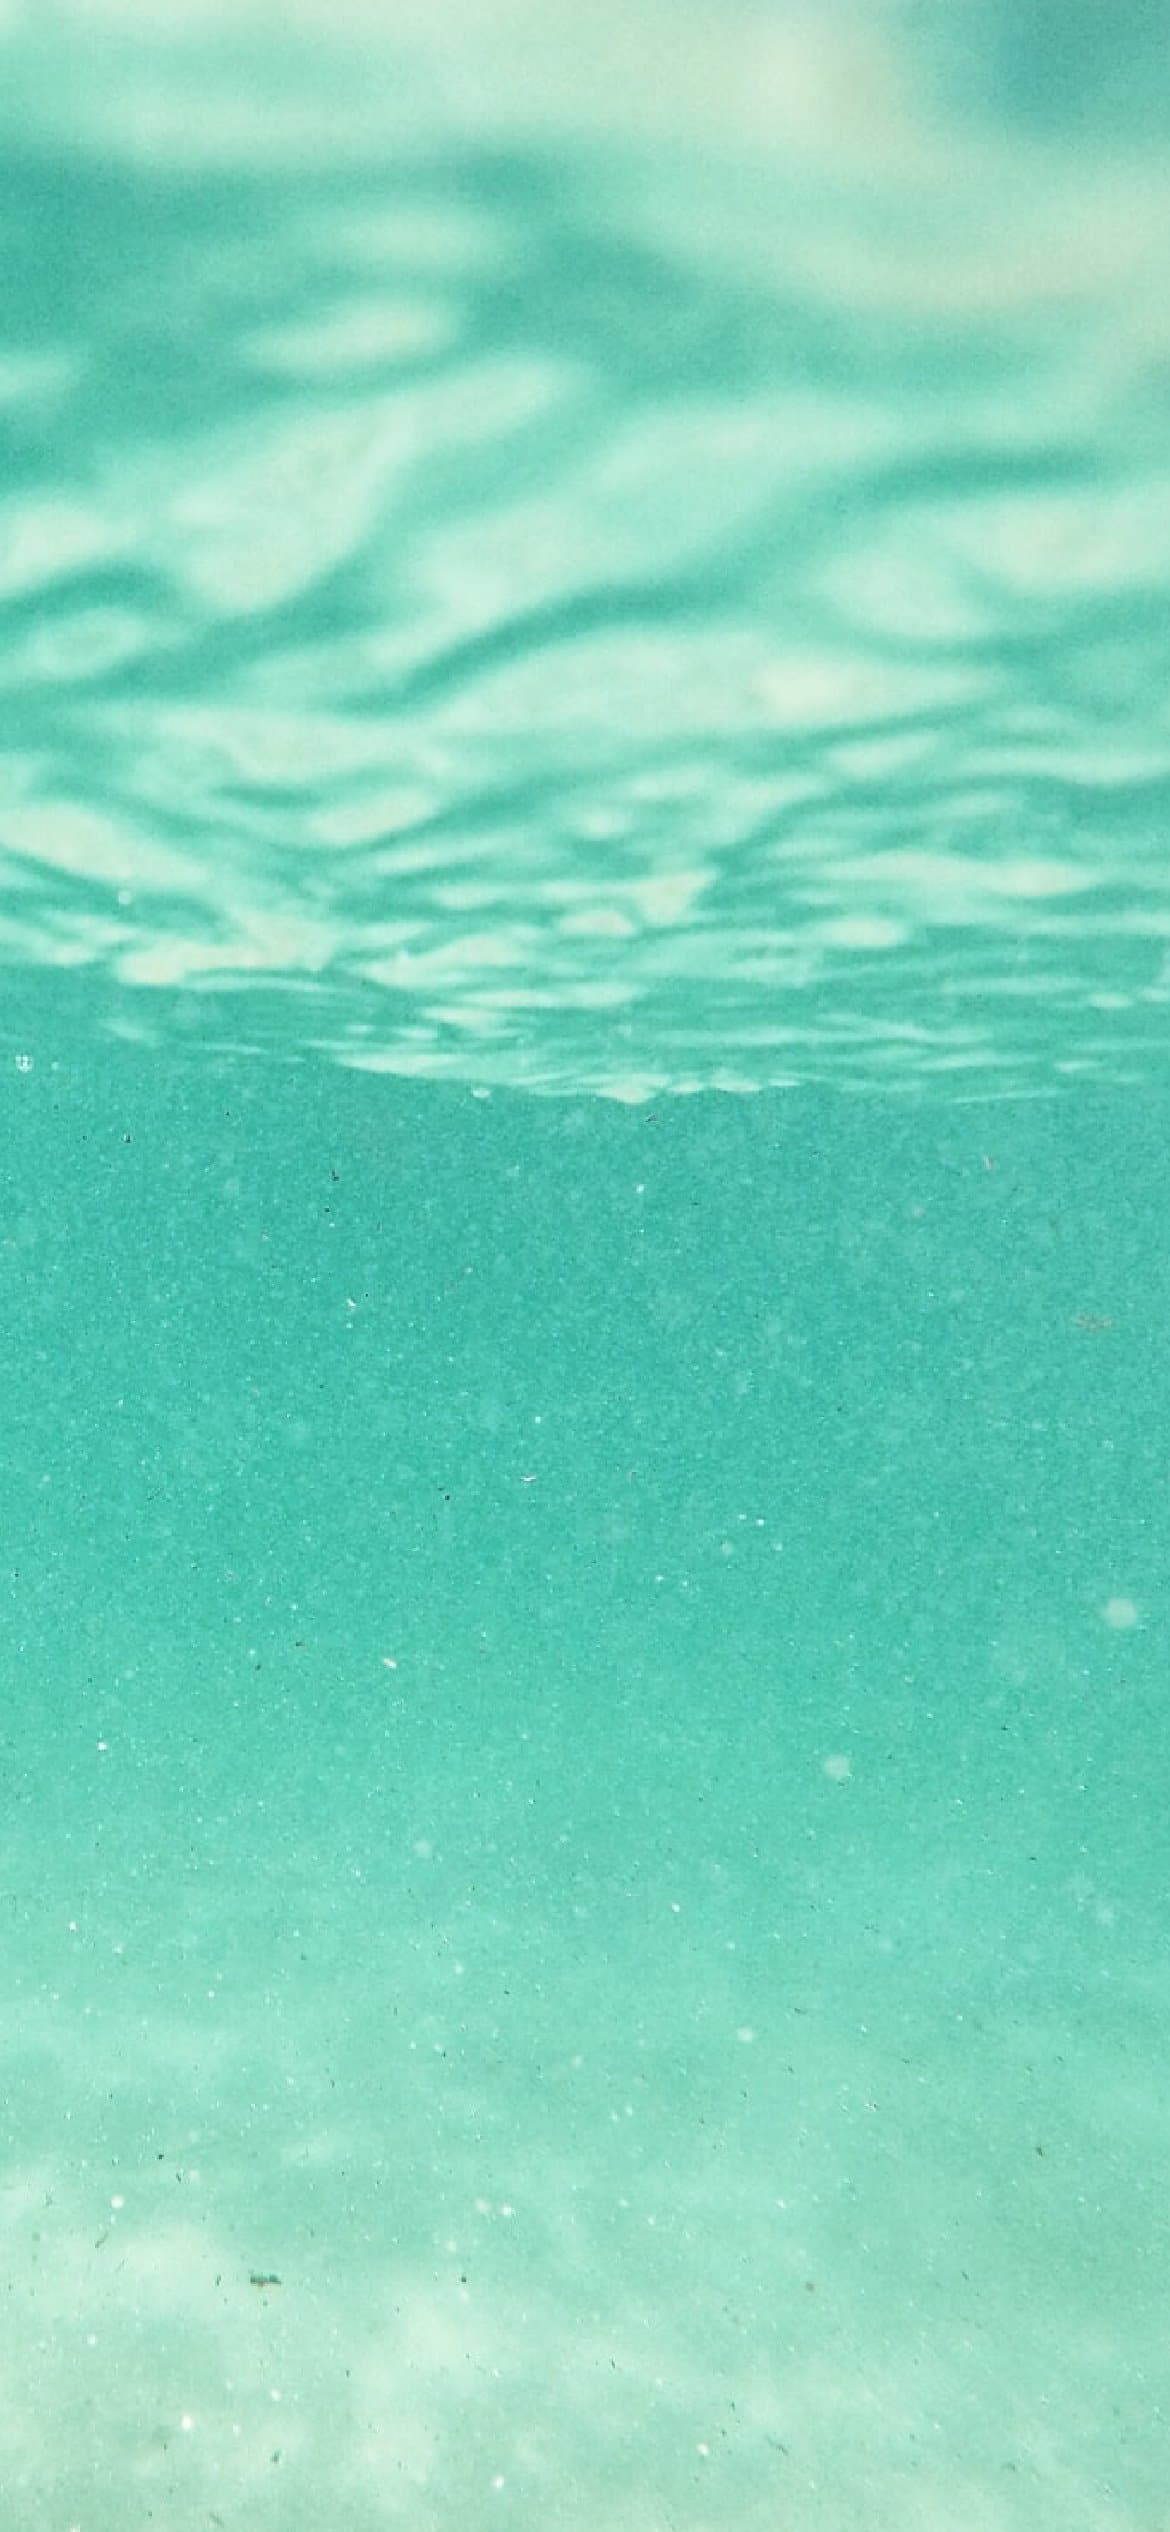 A close up of the water in a swimming pool - Light blue